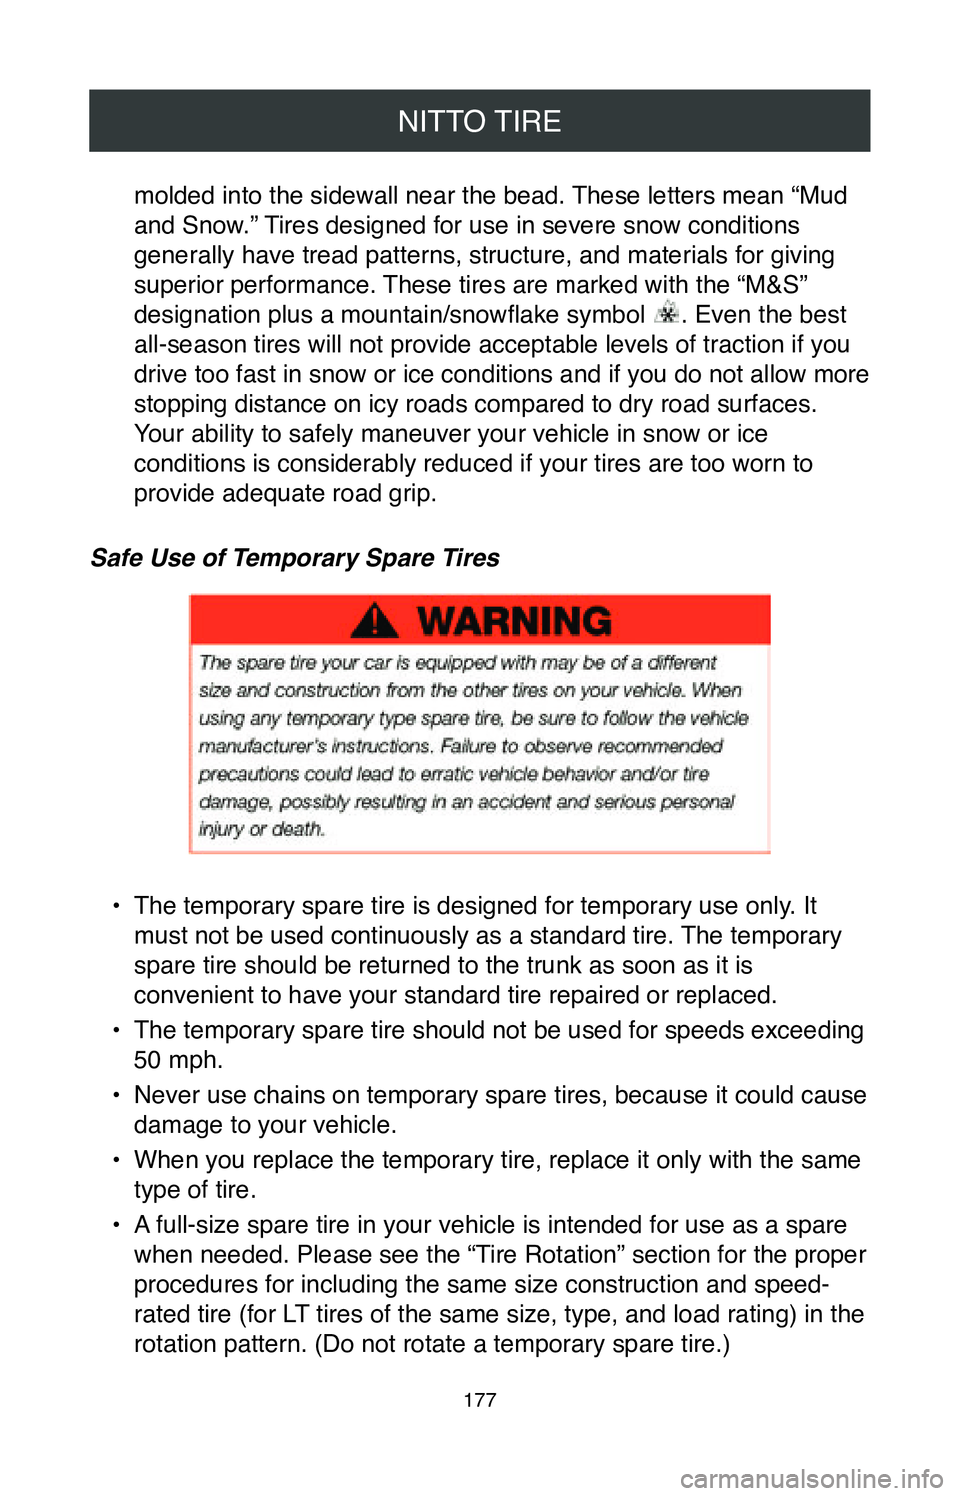 TOYOTA COROLLA HYBRID 2020  Warranties & Maintenance Guides (in English) NITTO TIRE
177
molded into the sidewall near the bead. These letters mean “Mud 
and Snow.” Tires designed for use in severe snow conditions 
generally have tread patterns, structure, and materials